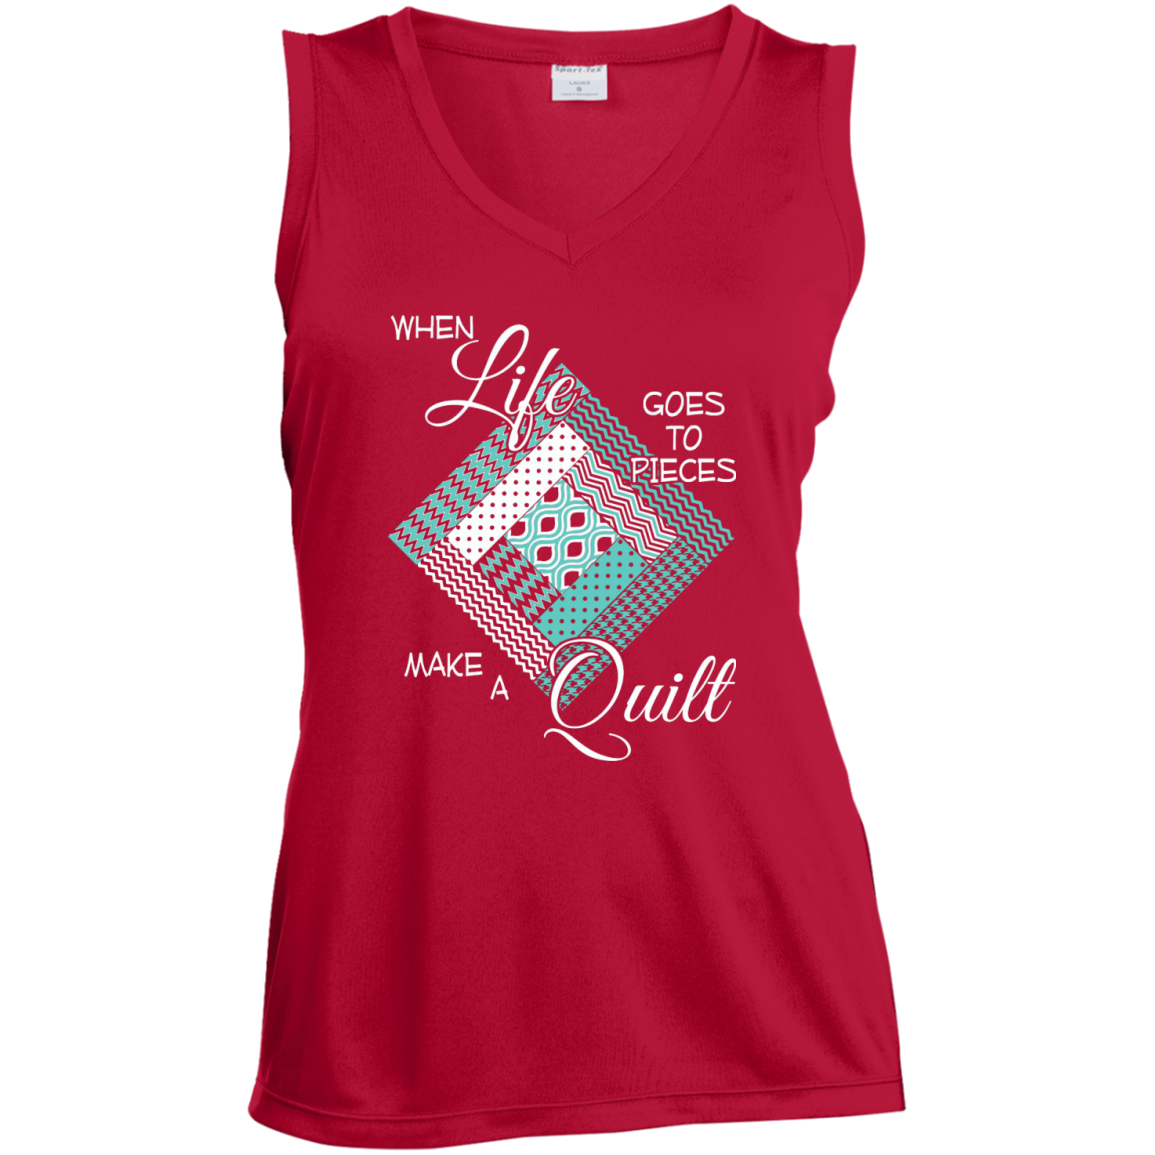 Make a Quilt (turquoise) Ladies Sleeveless V-Neck - Crafter4Life - 4